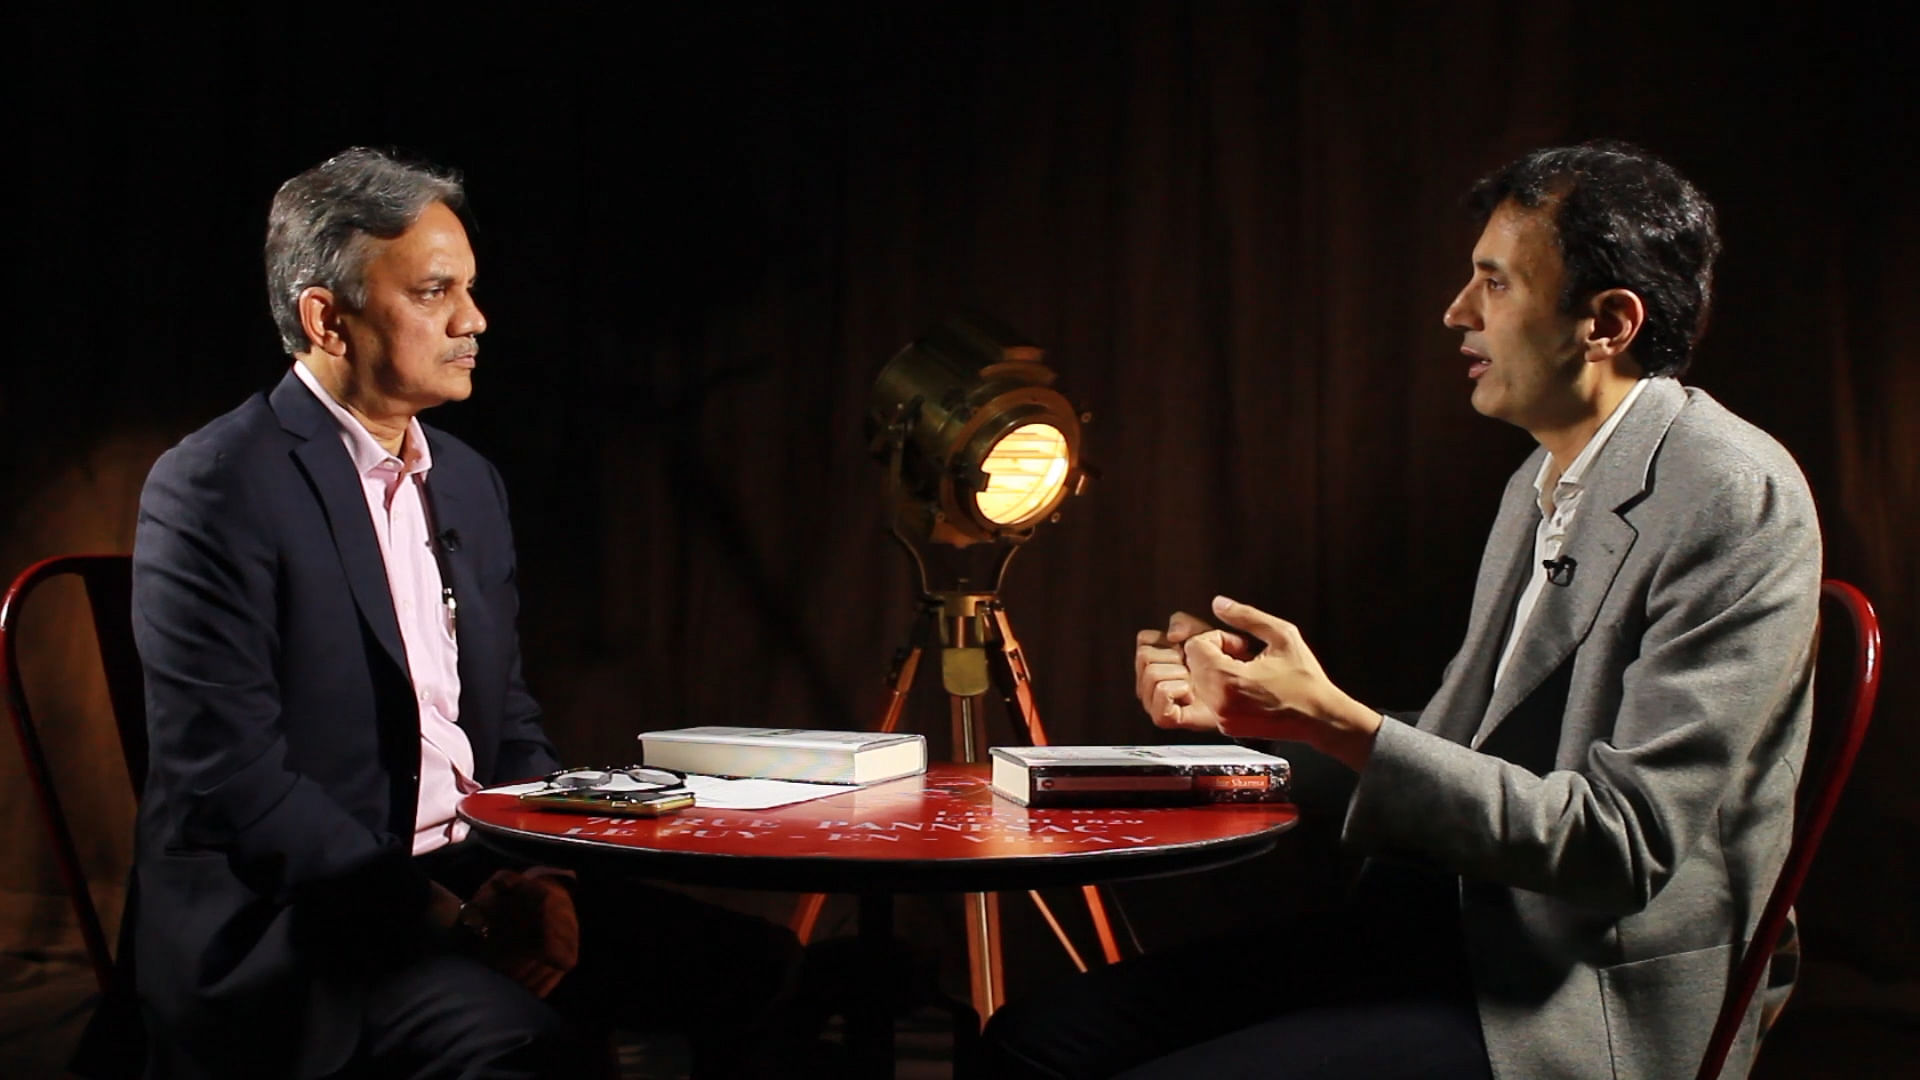 The Quint’s Editorial Director, Sanjay Pugalia in conversation with Global Investor and author, Ruchir Sharma.